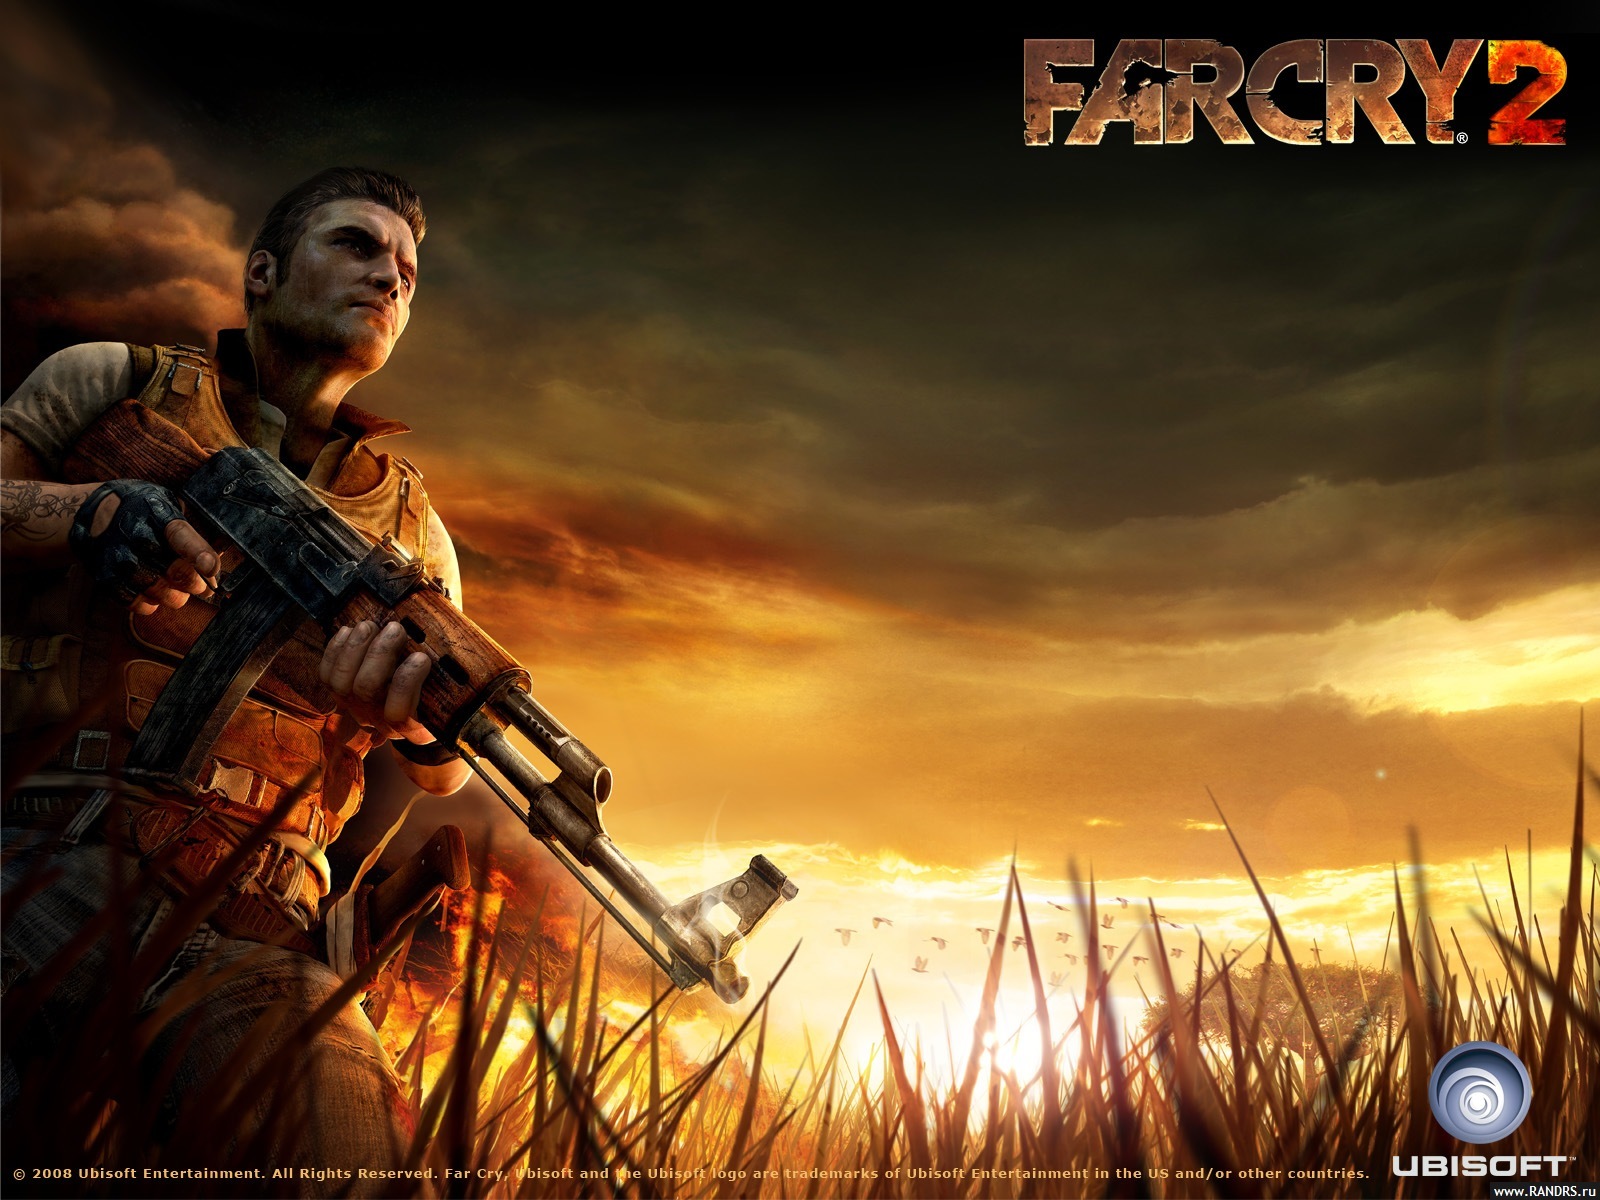 far cry 2, games, people, men